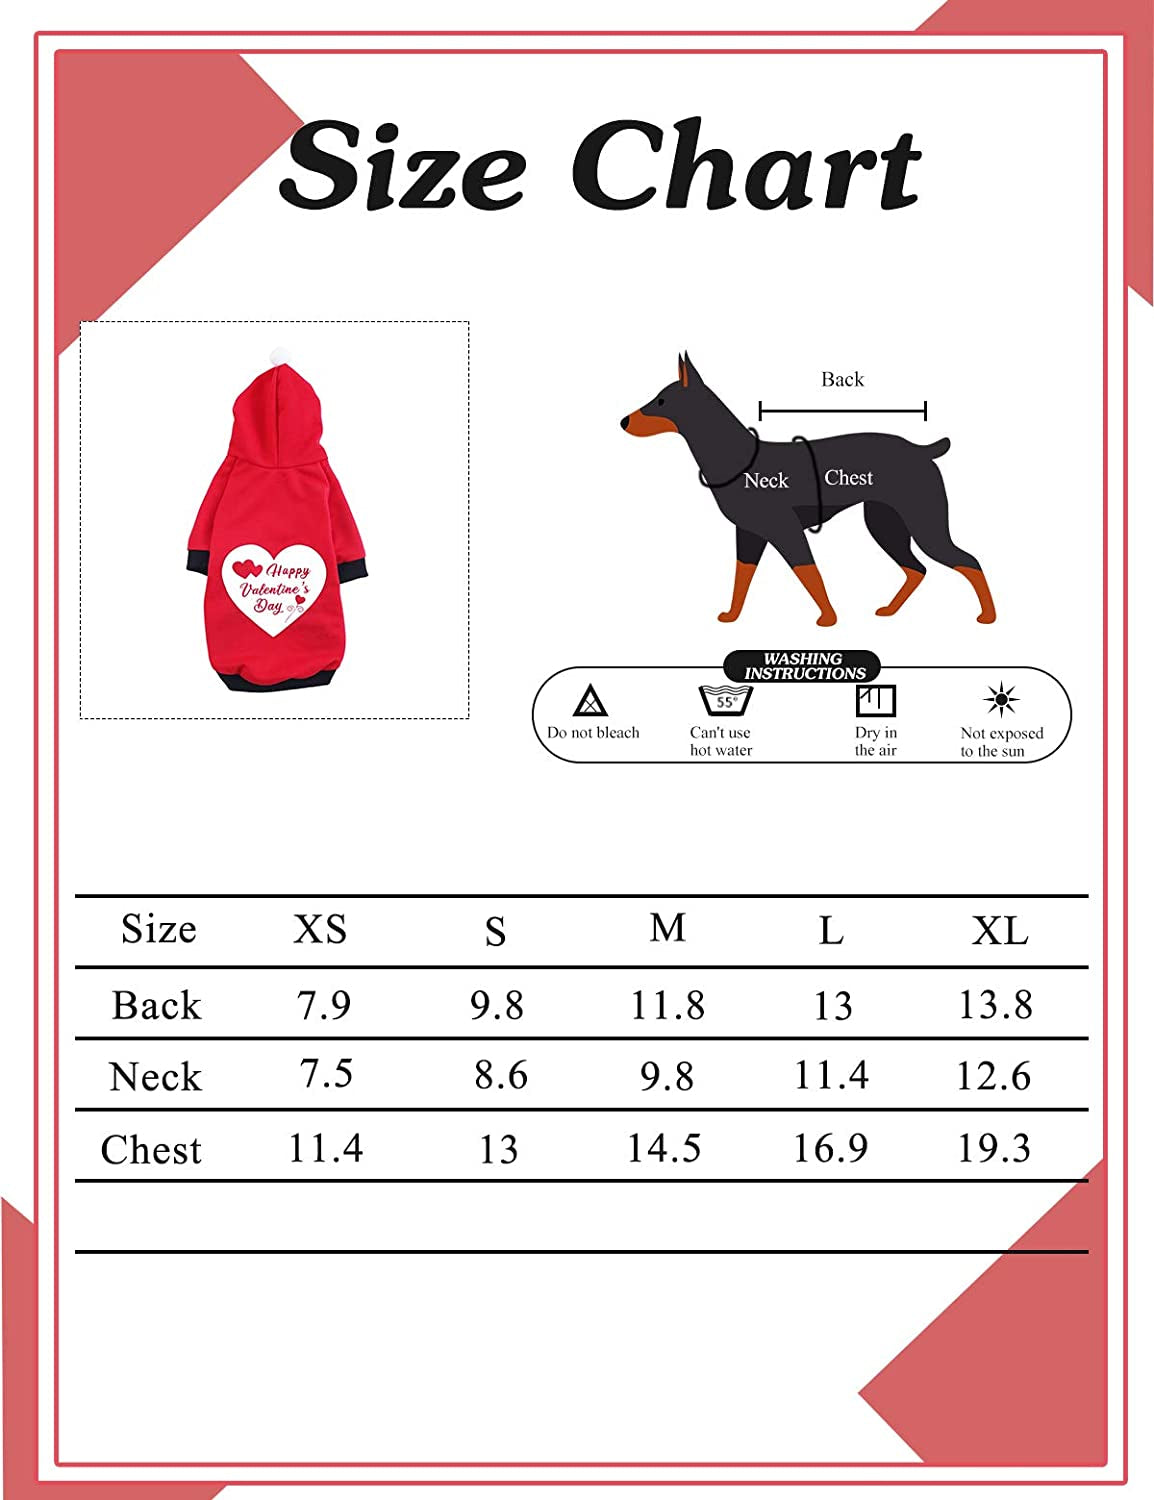 Impoosy Valentine'S Day Pet Dog Hoodies Funny Heart Shirt Cute Puppy Costume Clothes for Small Medium Dogs Cats Pets (S)